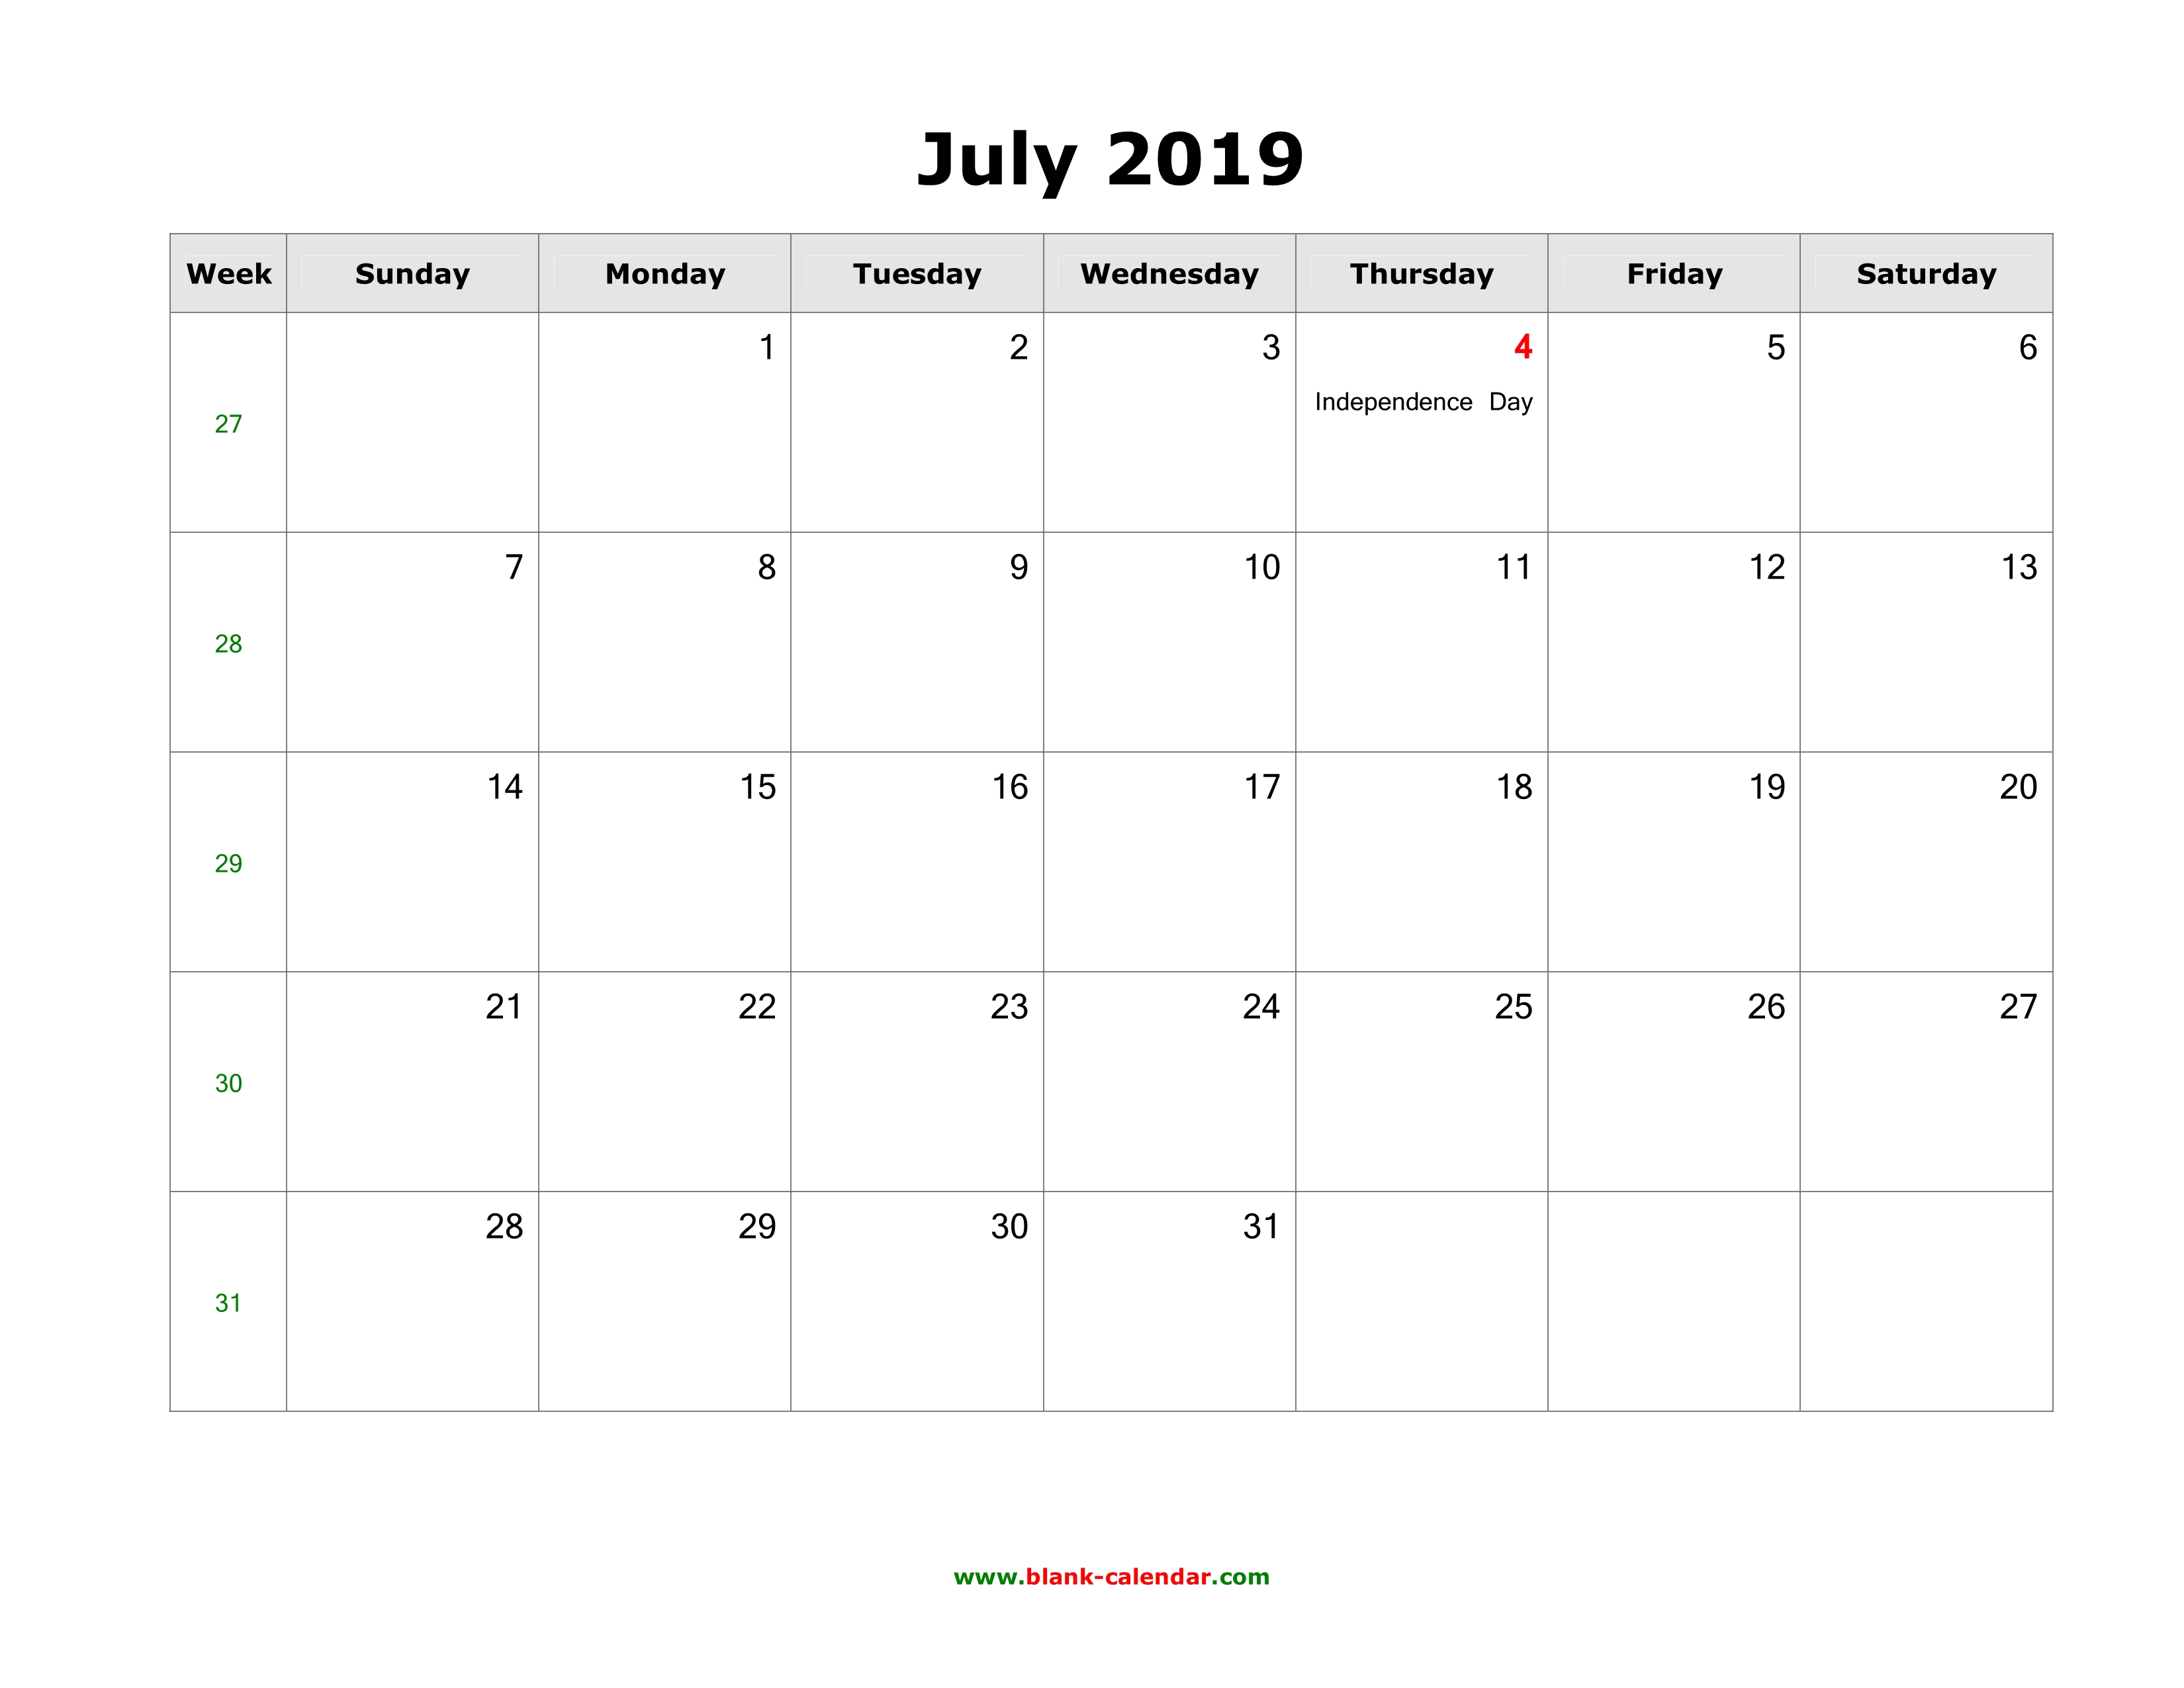 download-july-2019-blank-calendar-with-us-holidays-horizontal